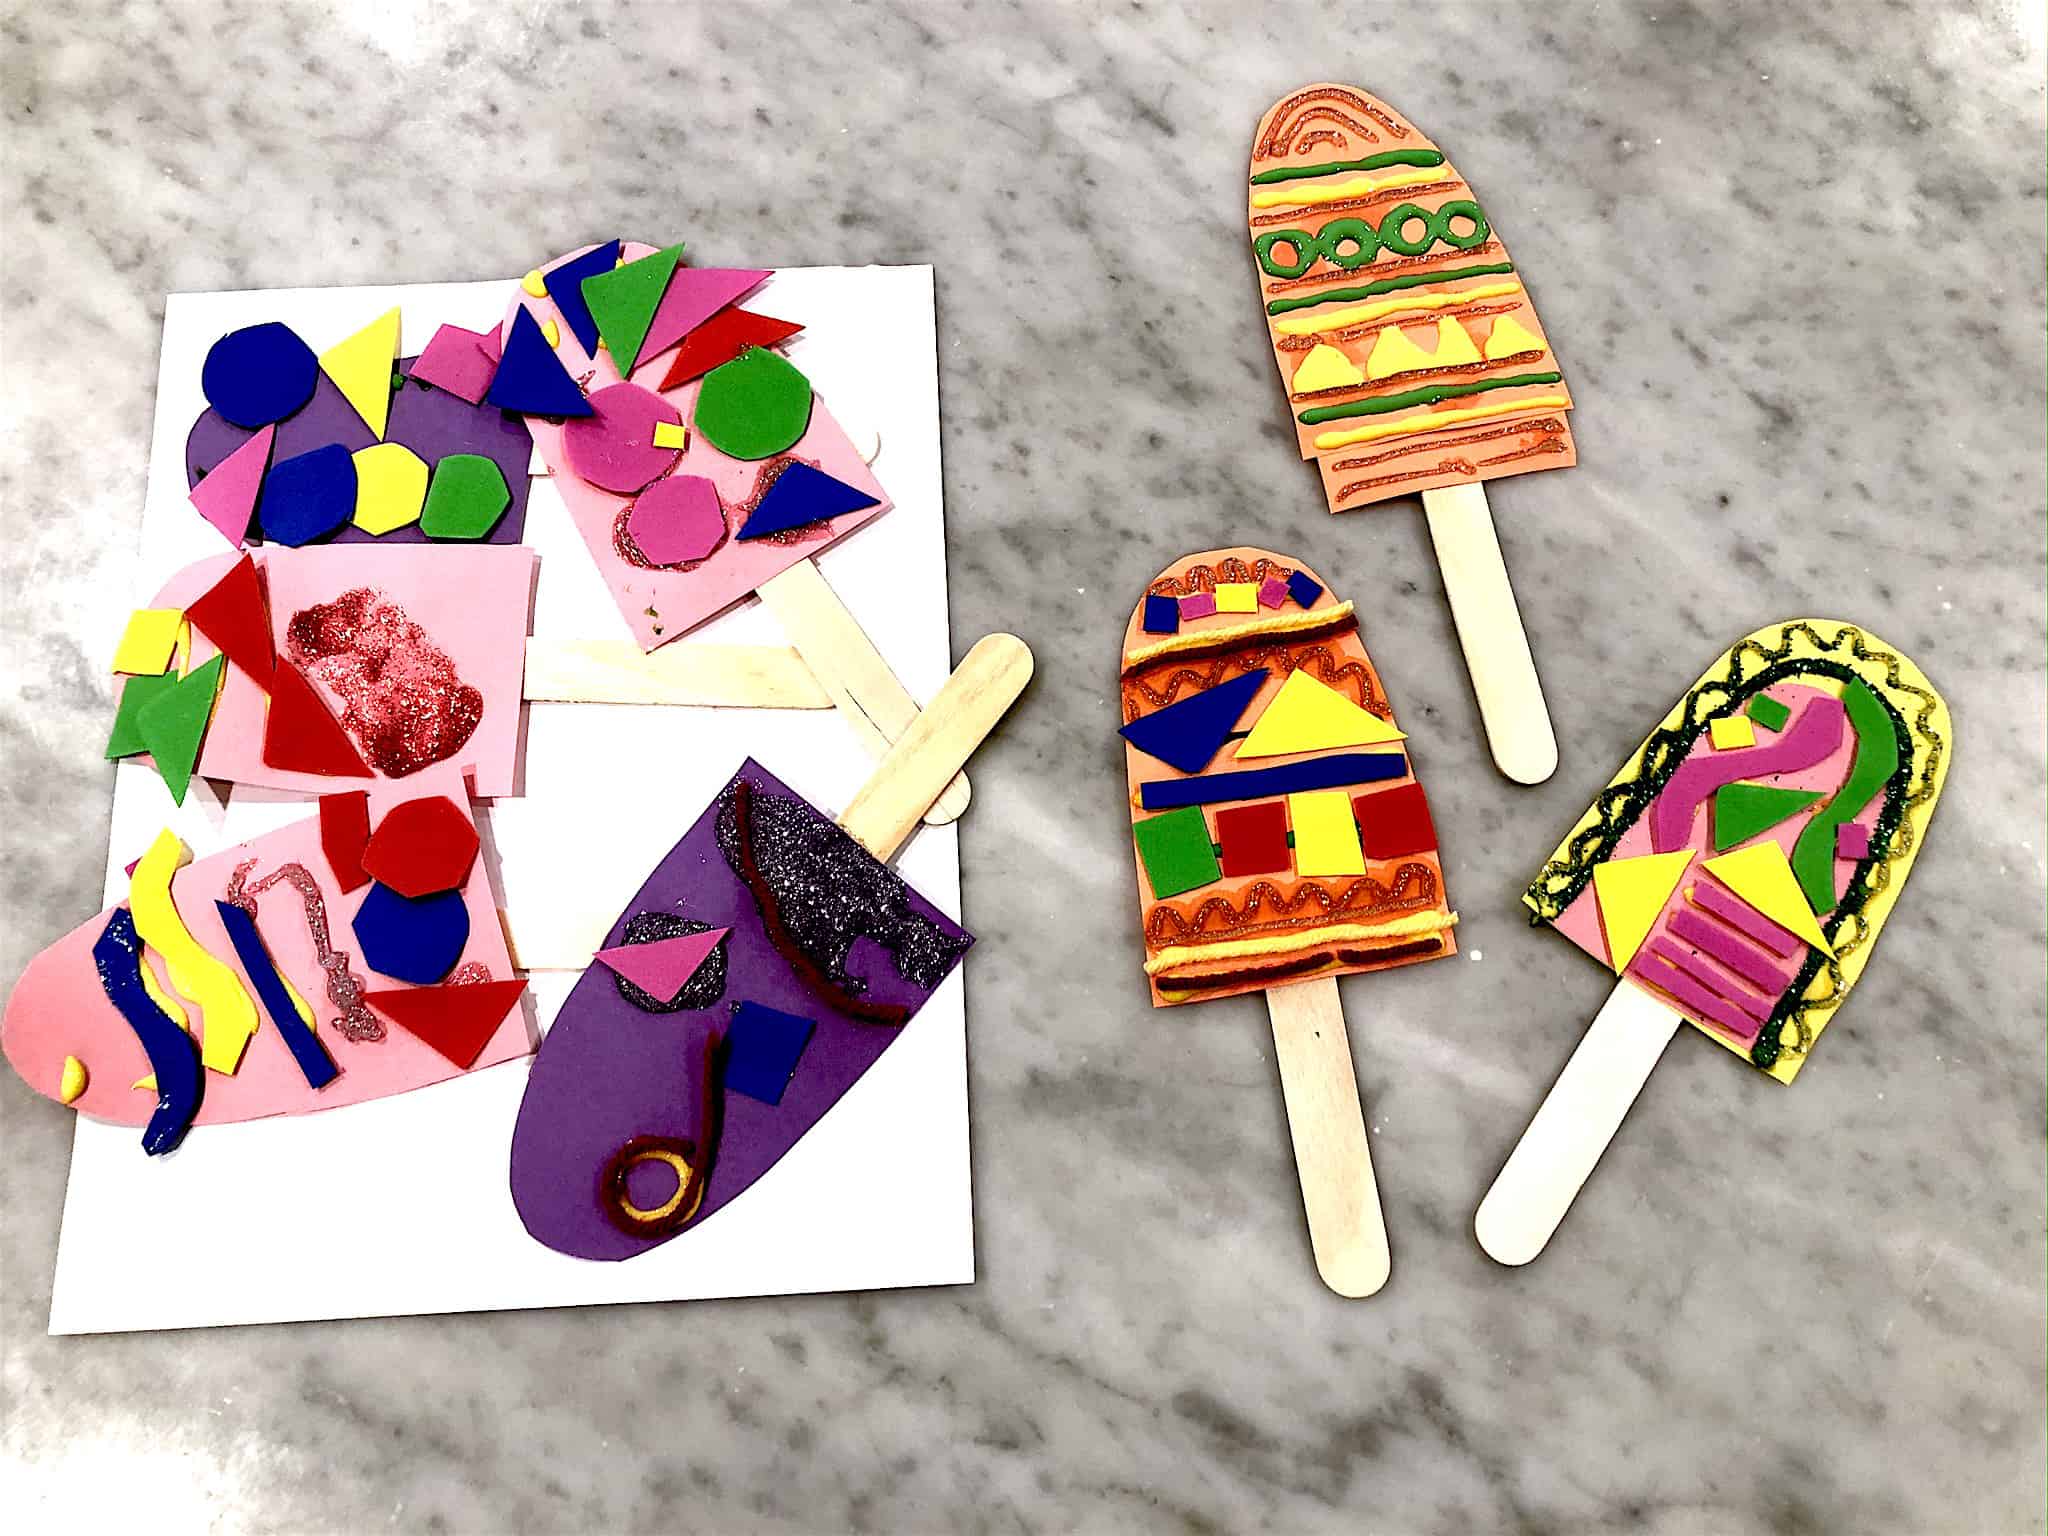 These Popsicle Stick Crafts For Kids Are An Amazing Compilation Of Some of Our Favorite Easy Popsicle Crafts. They Are Great Crafts For Toddlers, Preschoolers, And Beyond